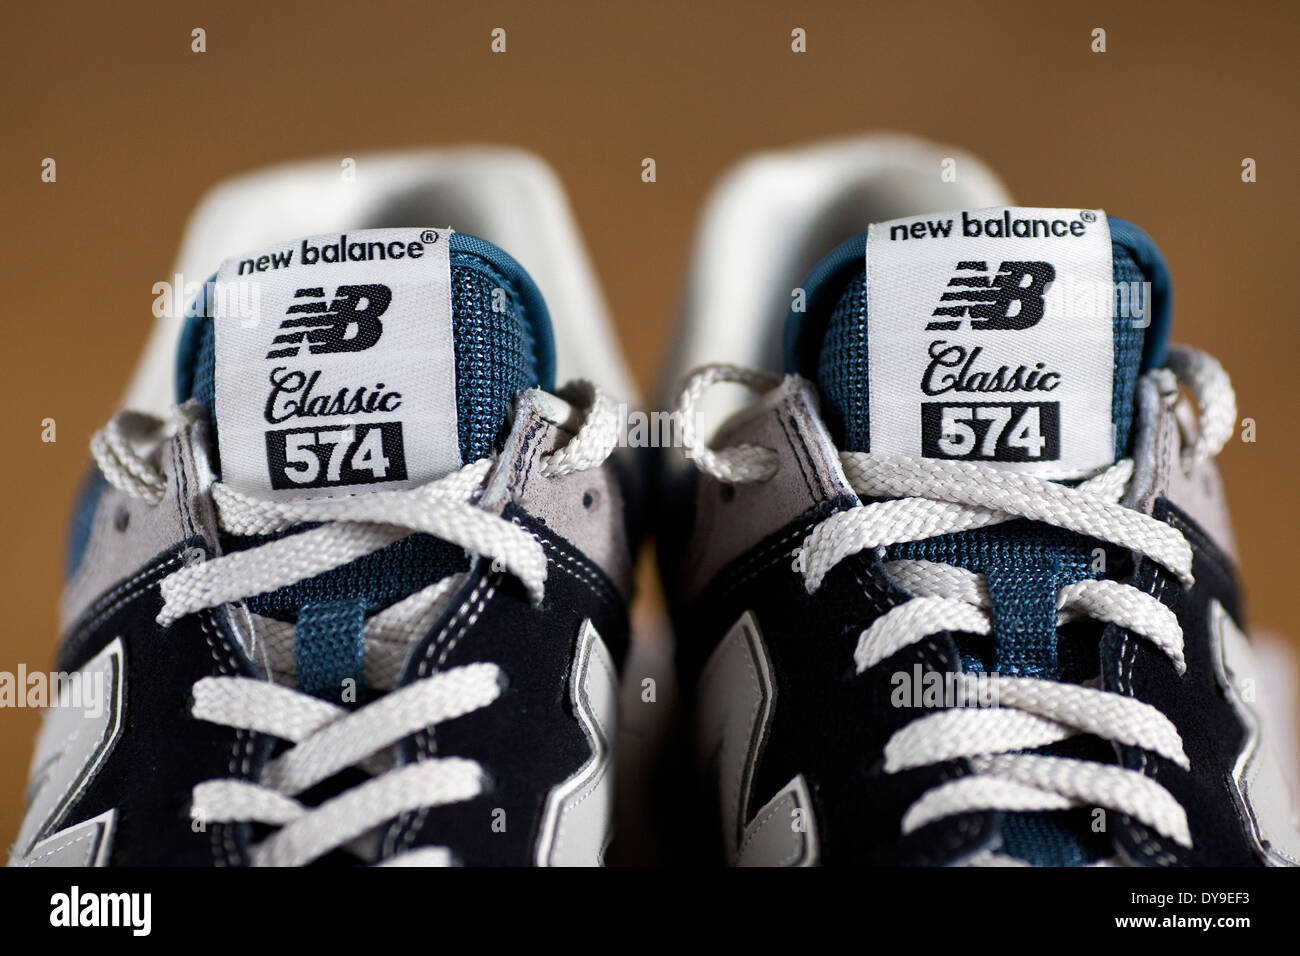 UK, London : A picture shows a pair of New Balance shoes on a shoe box  Stock Photo - Alamy